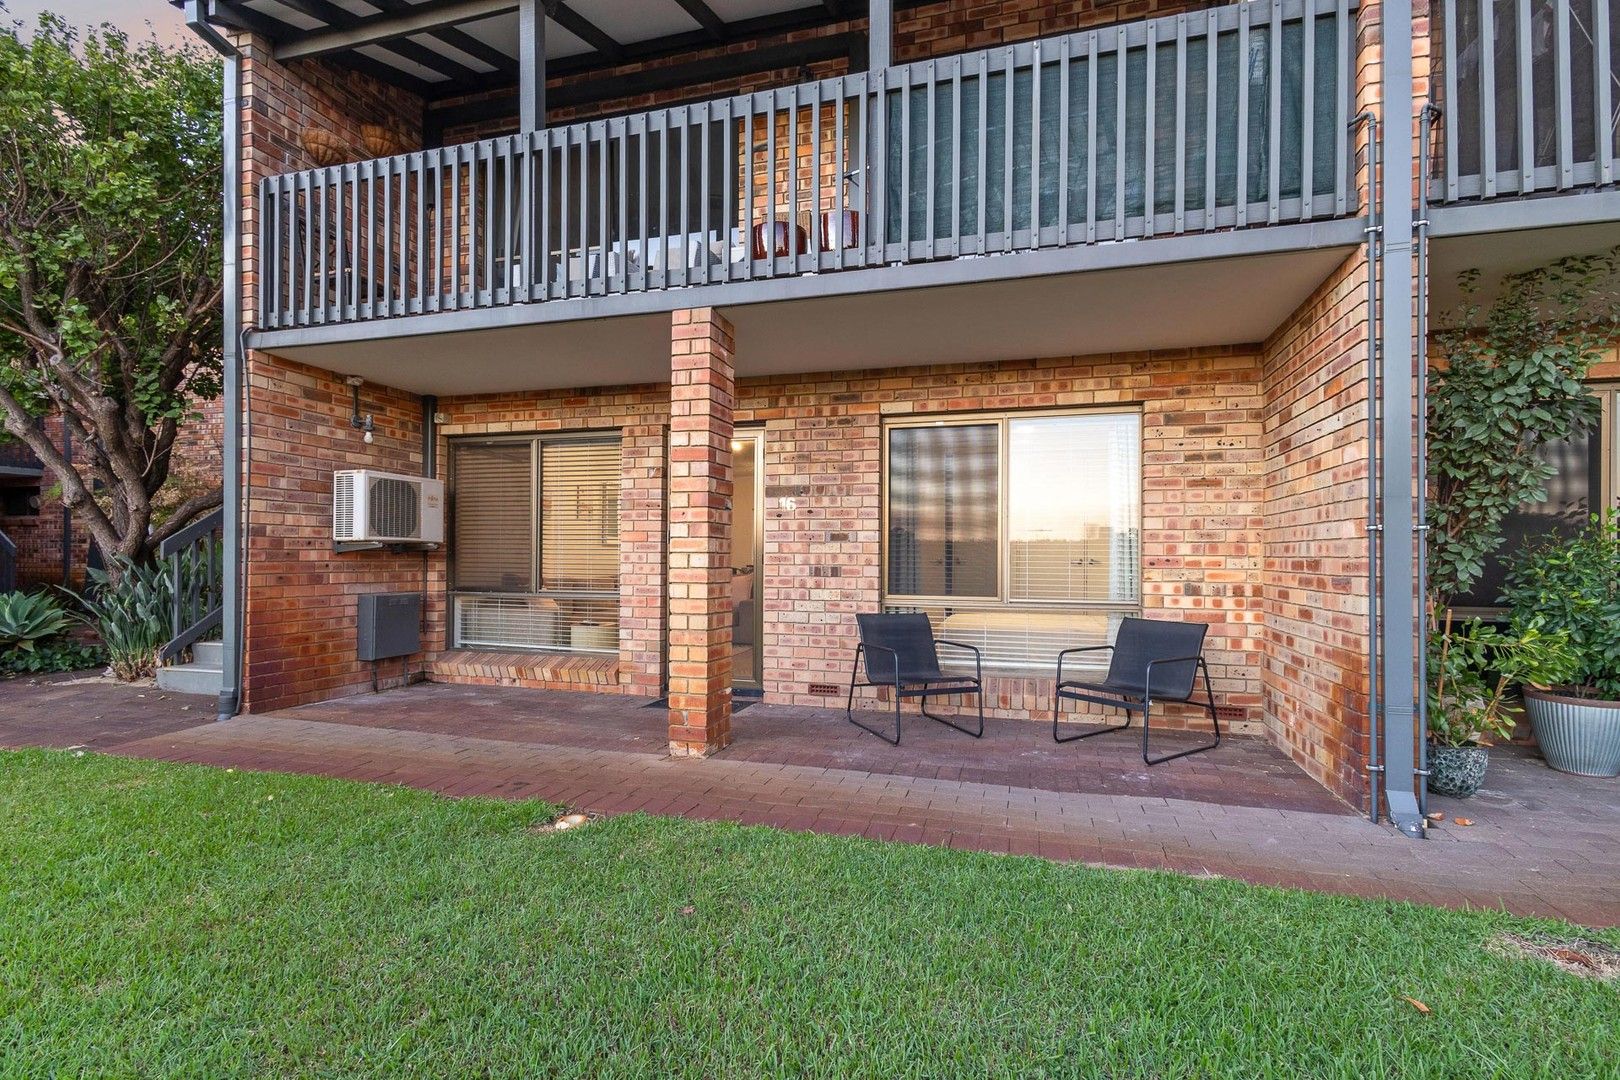 16/13 STORTHES STREET, Mount Lawley WA 6050, Image 0